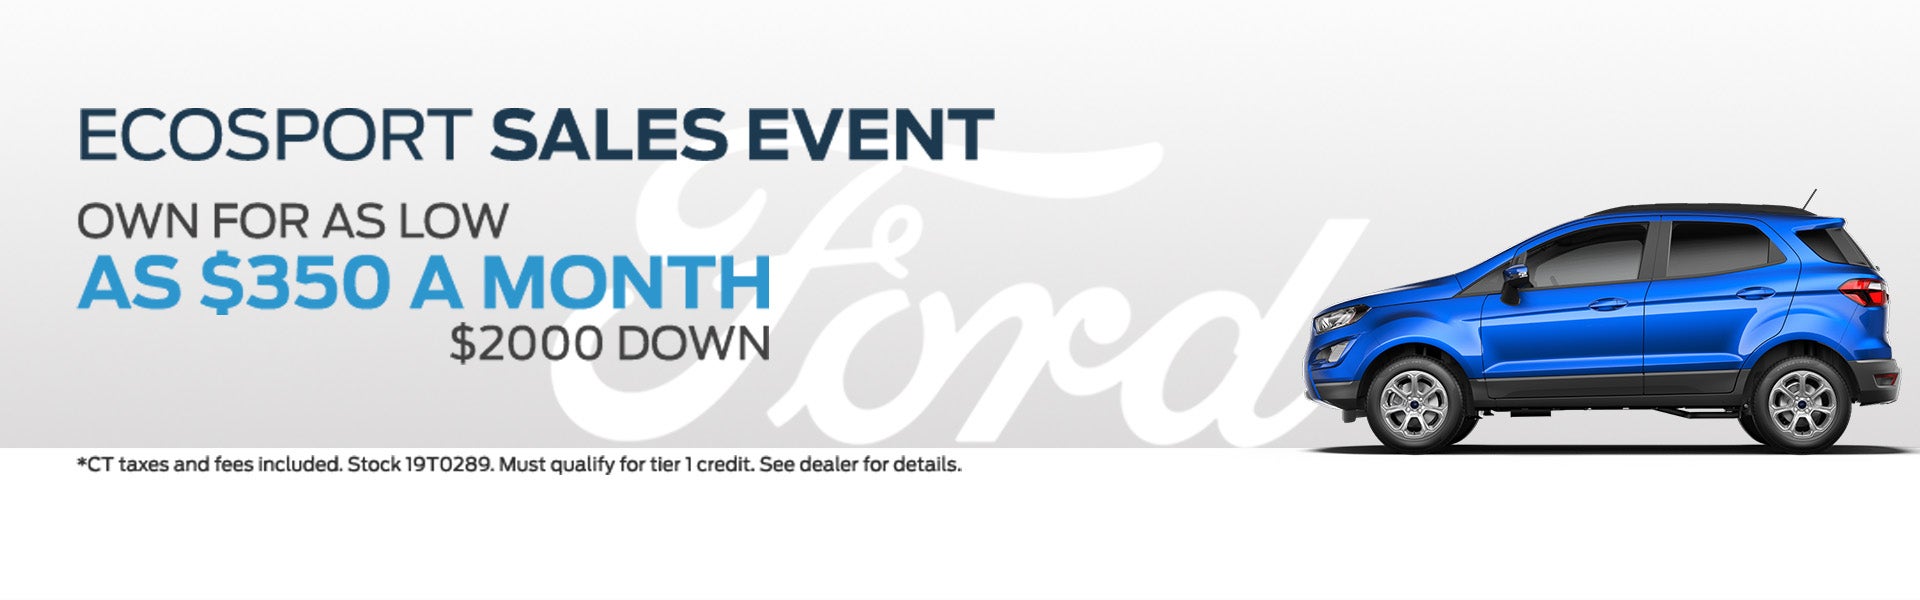 Ecosport Sales Event at McMahon Ford